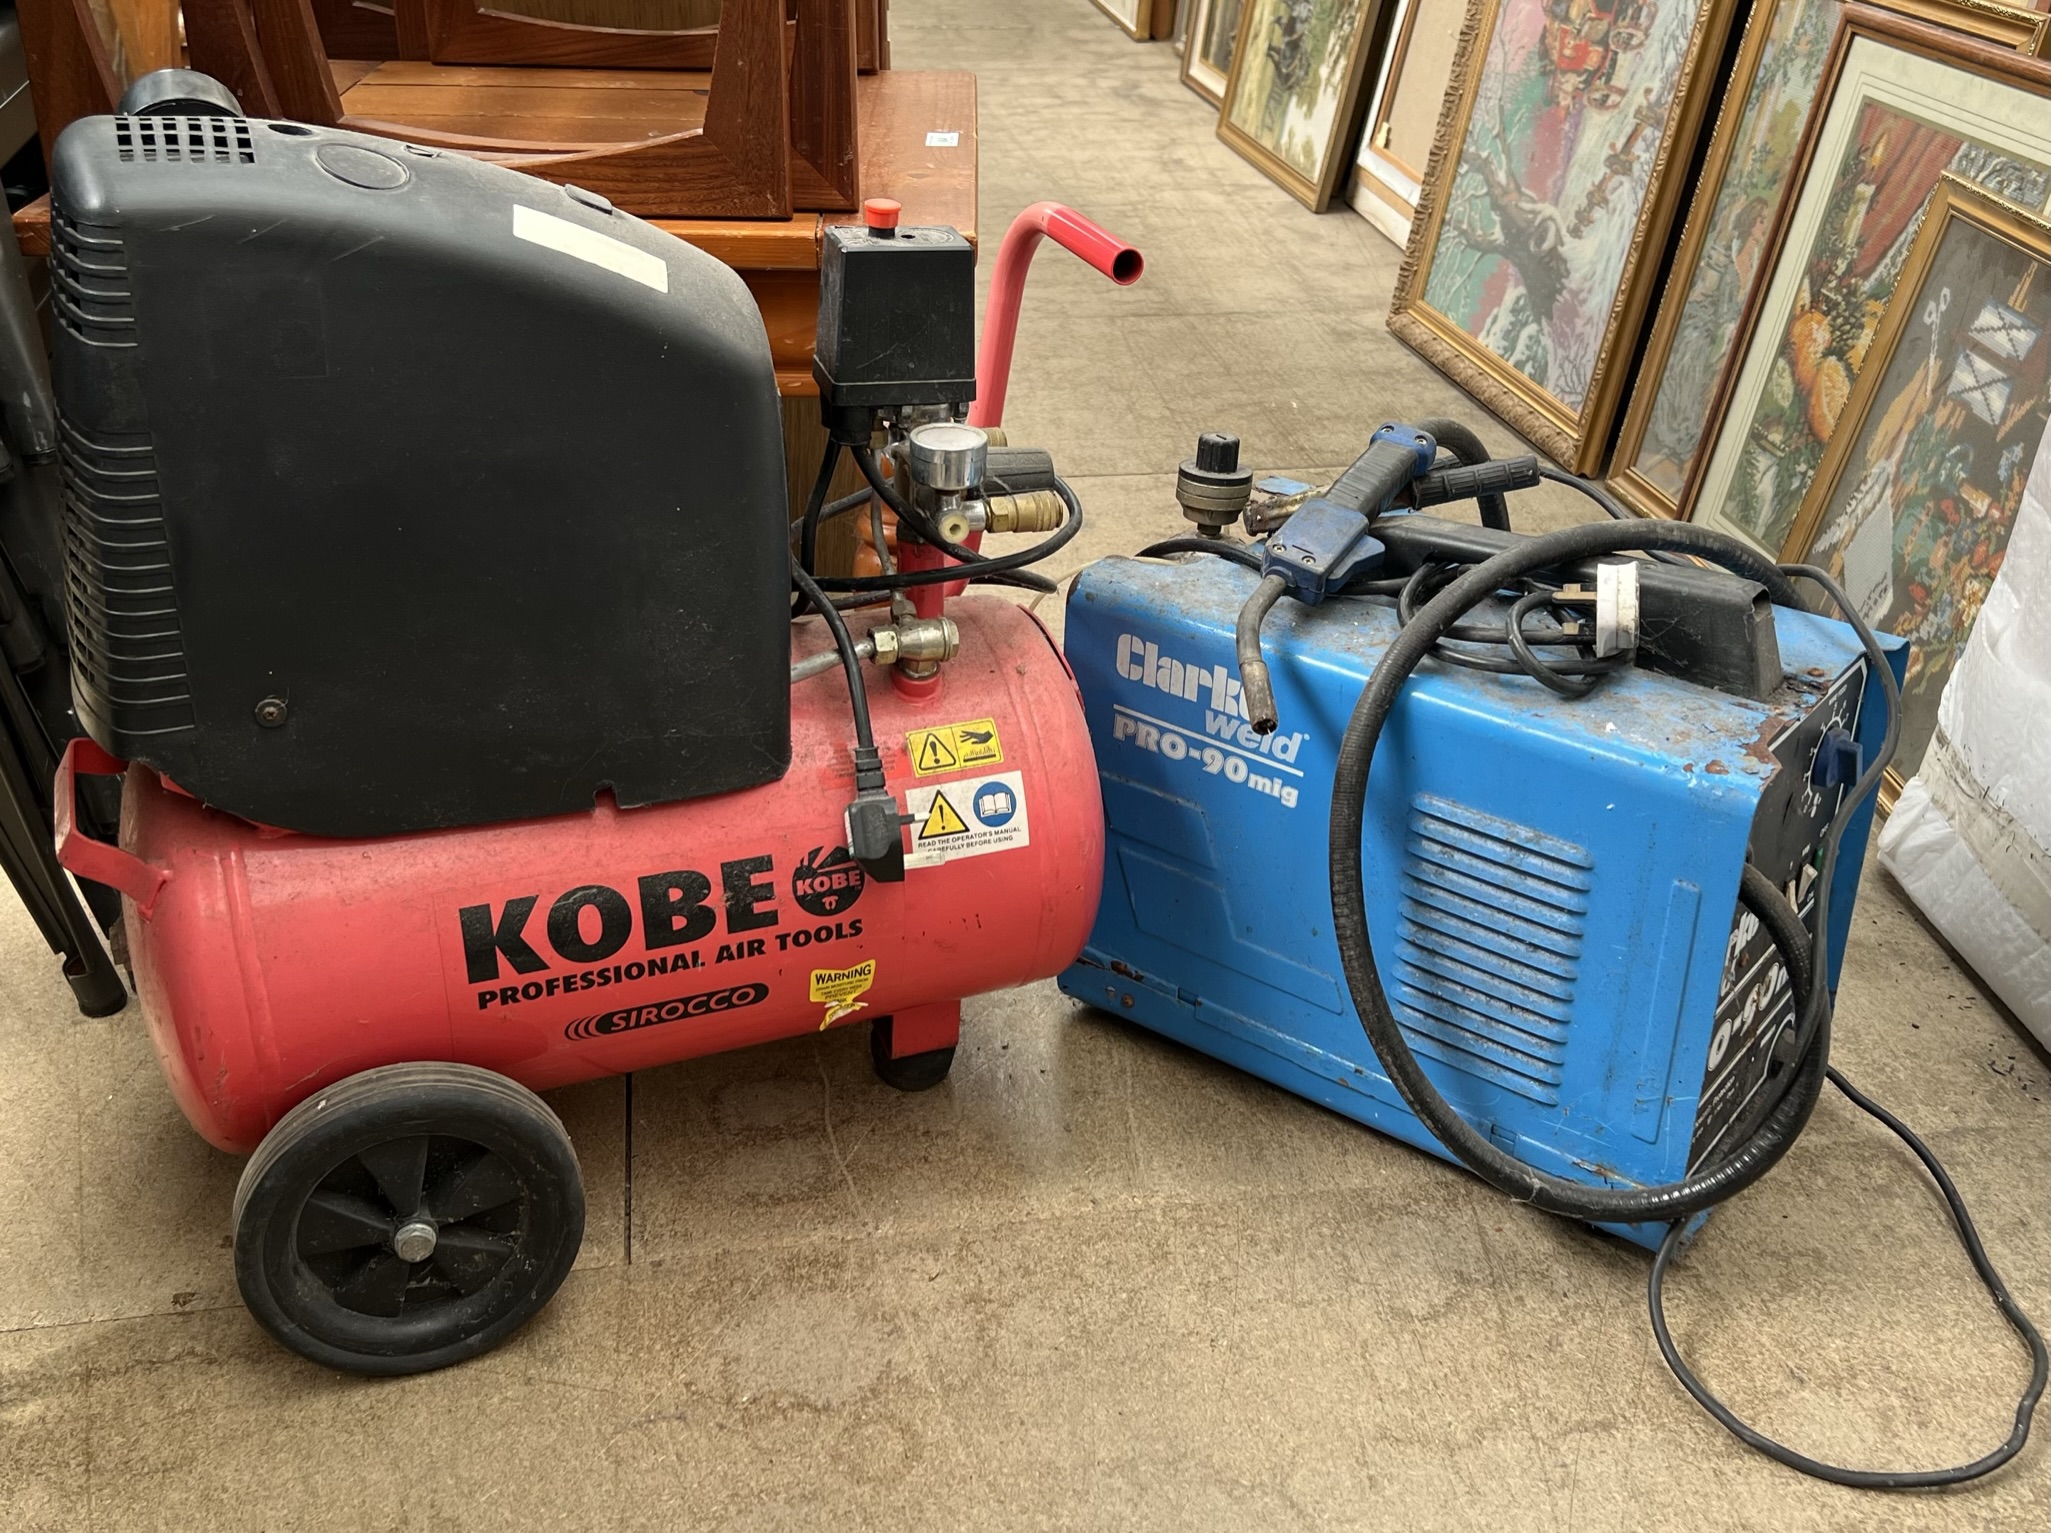 A Kobe sirocco compressor together with a Clarke Pro 90 Mig welder CONDITION REPORT: